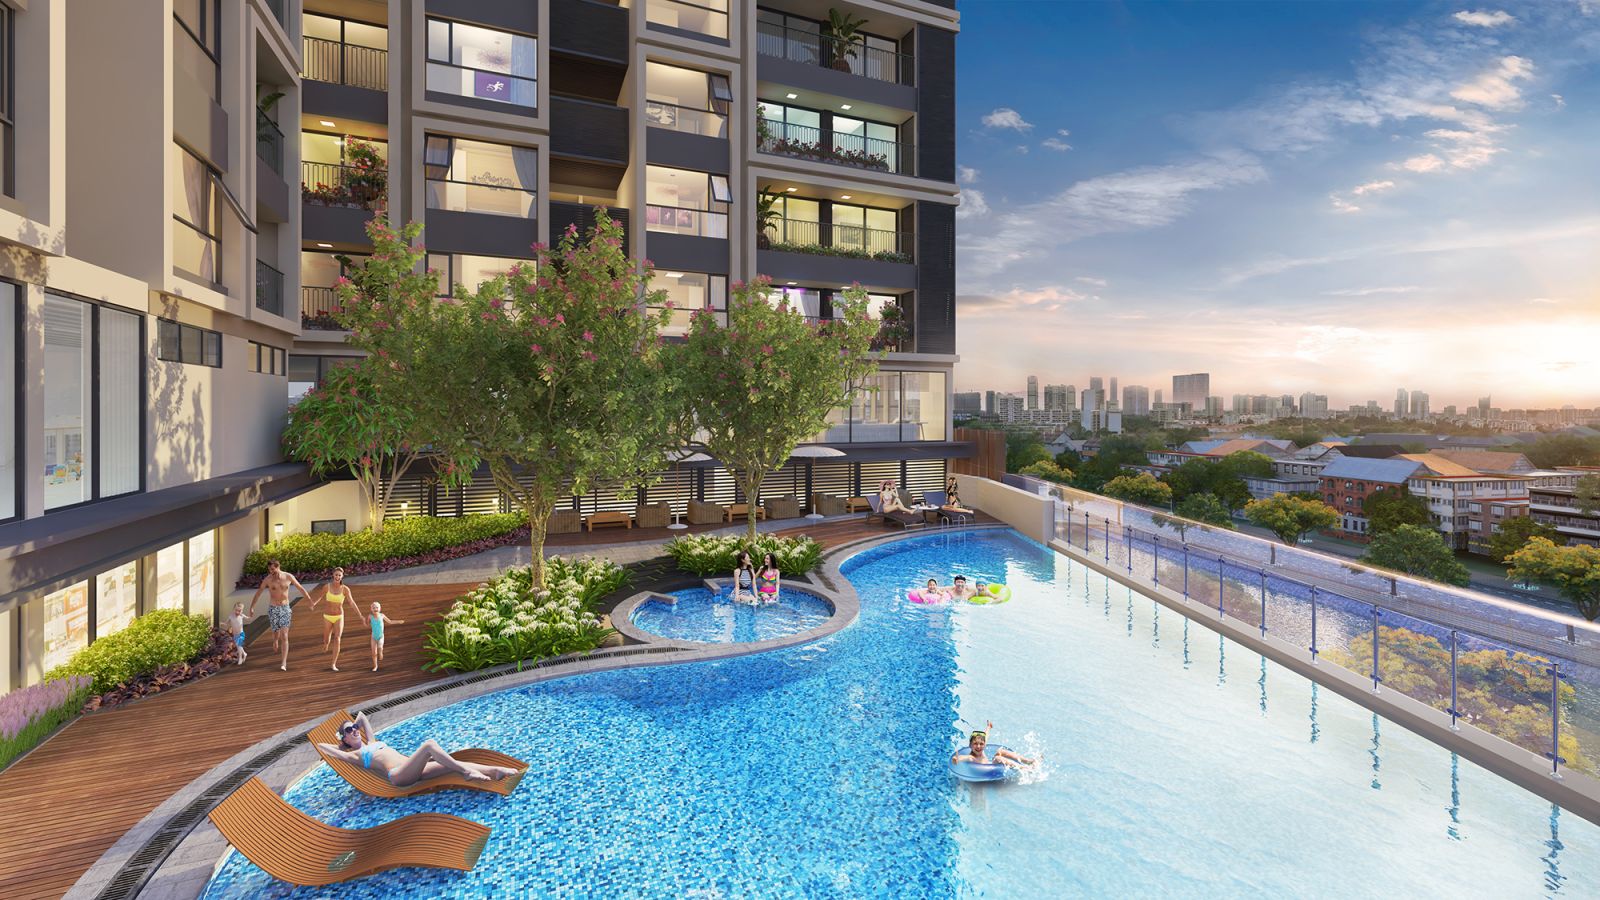 Investor of Hinode City reduces area for building apartments to design infinity pools at the 4th floors of buildings